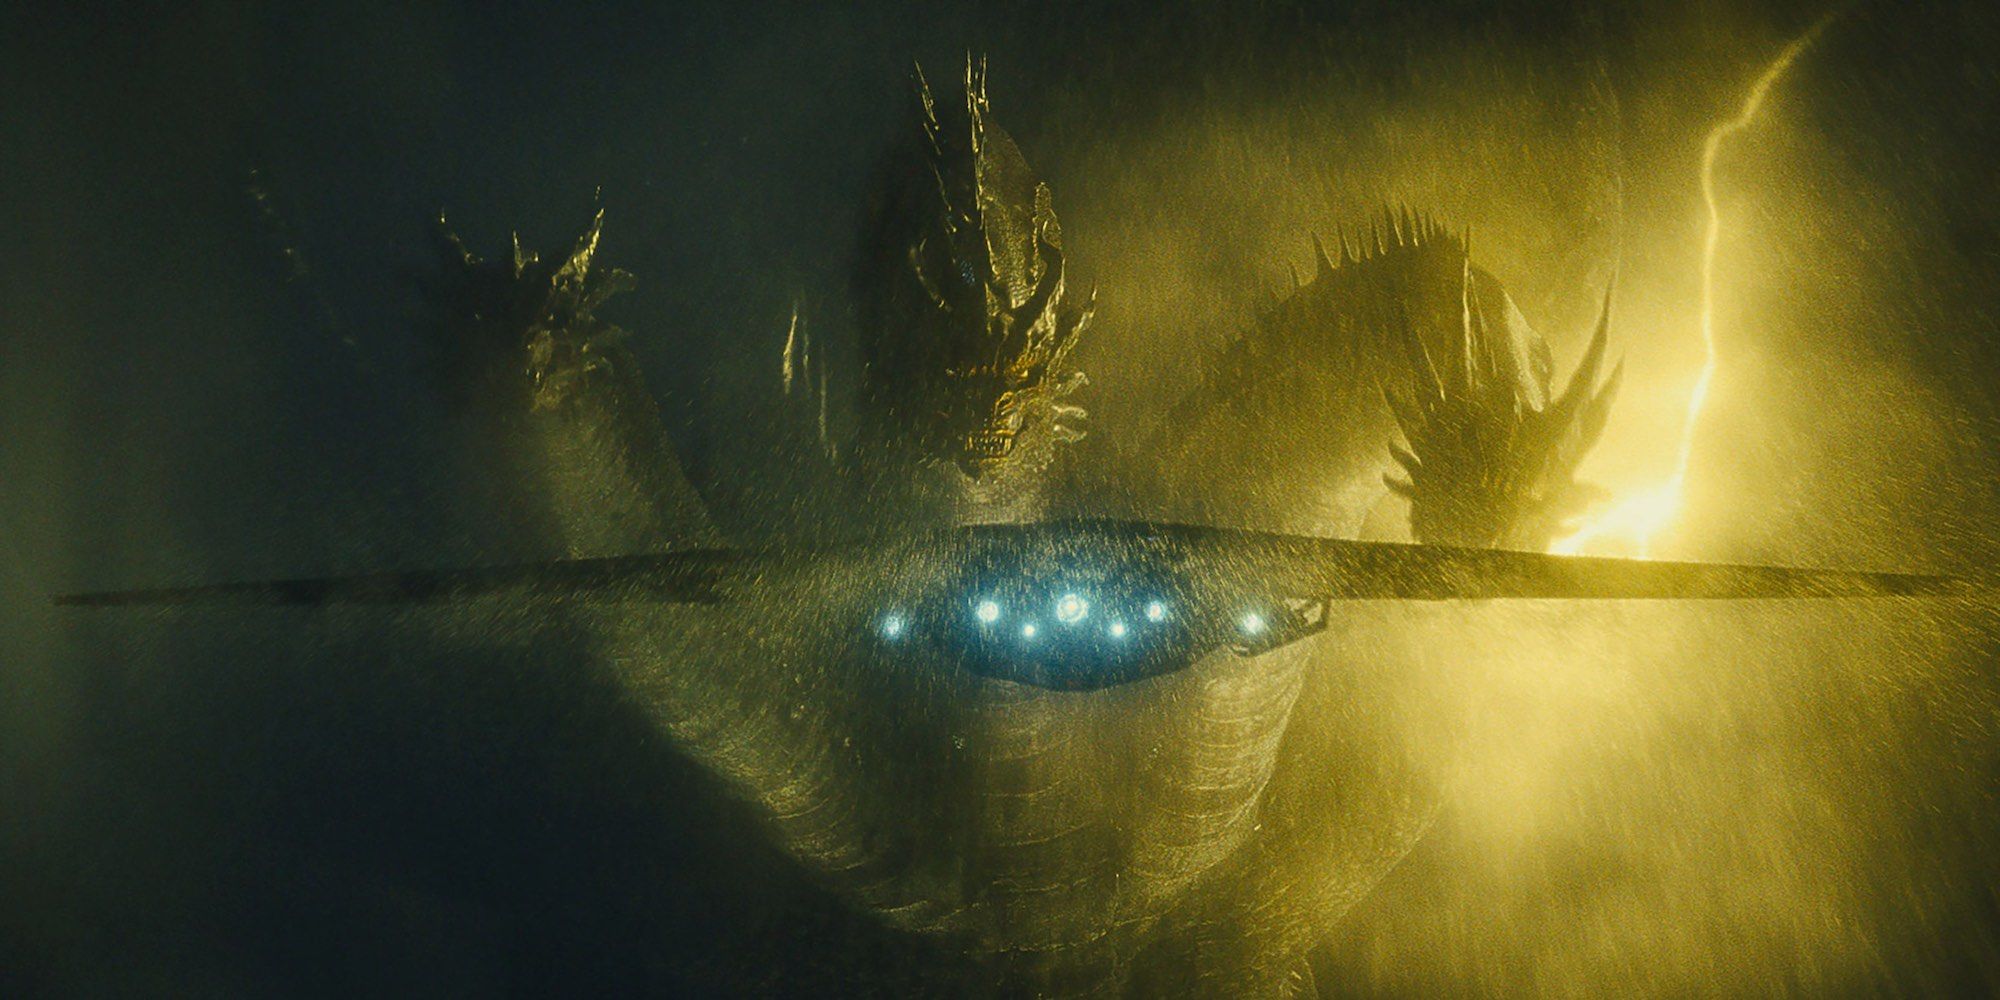 Ghidorah emerging out of the storm in front of the Argo in Godzilla: King of the Monsters